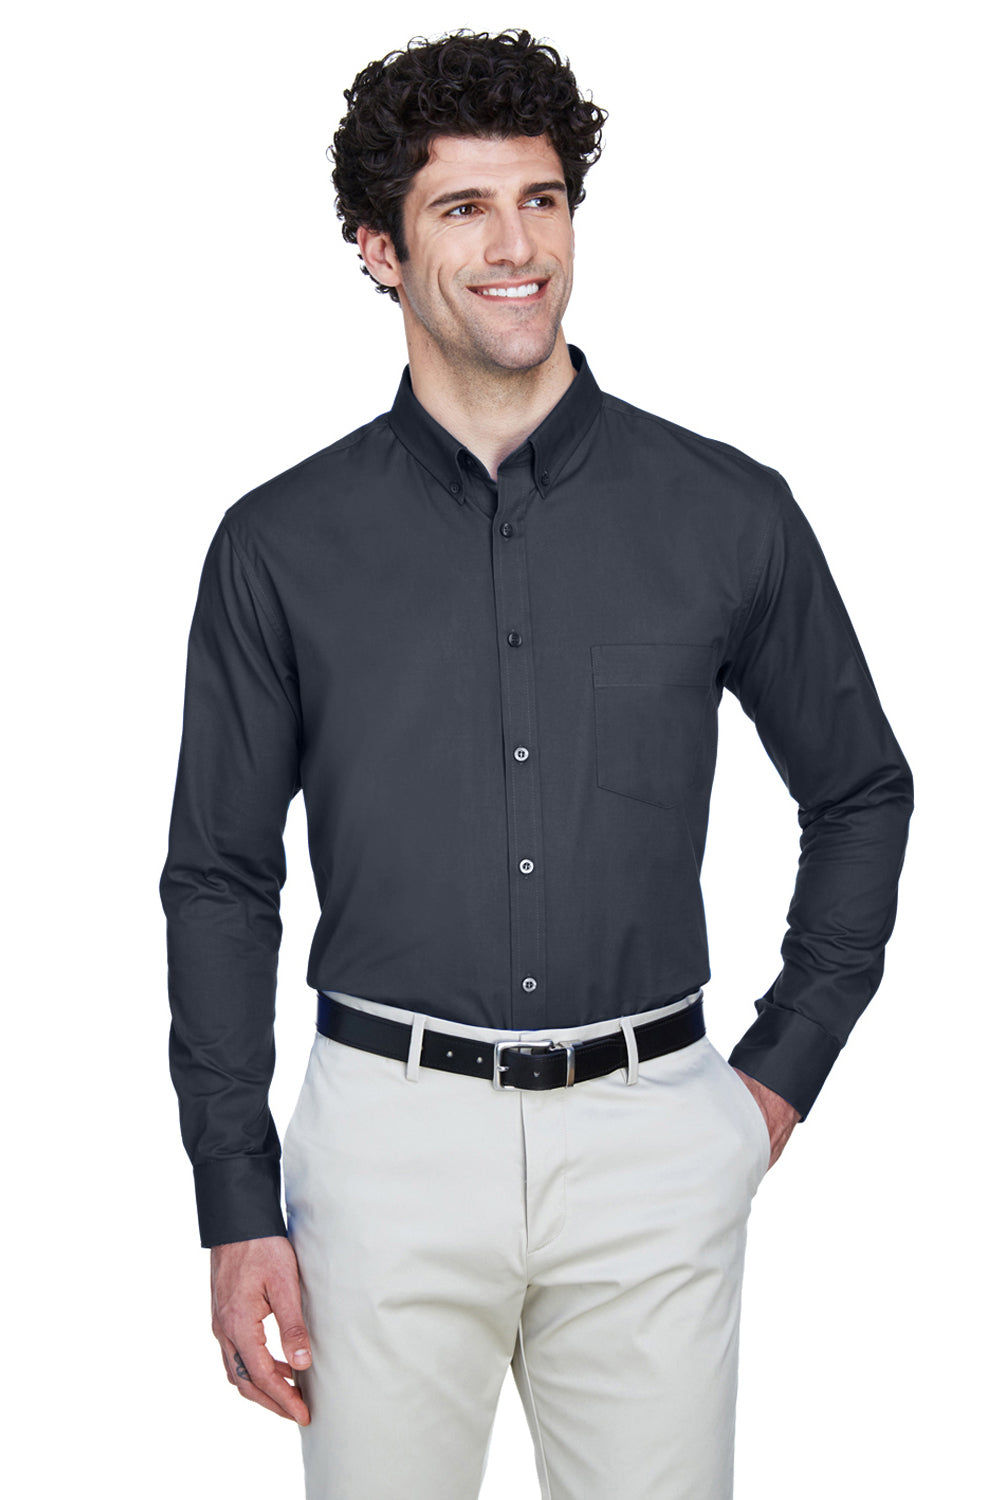 Core 365 88193 Mens Operate Long Sleeve Button Down Shirt w/ Pocket Carbon Grey Front